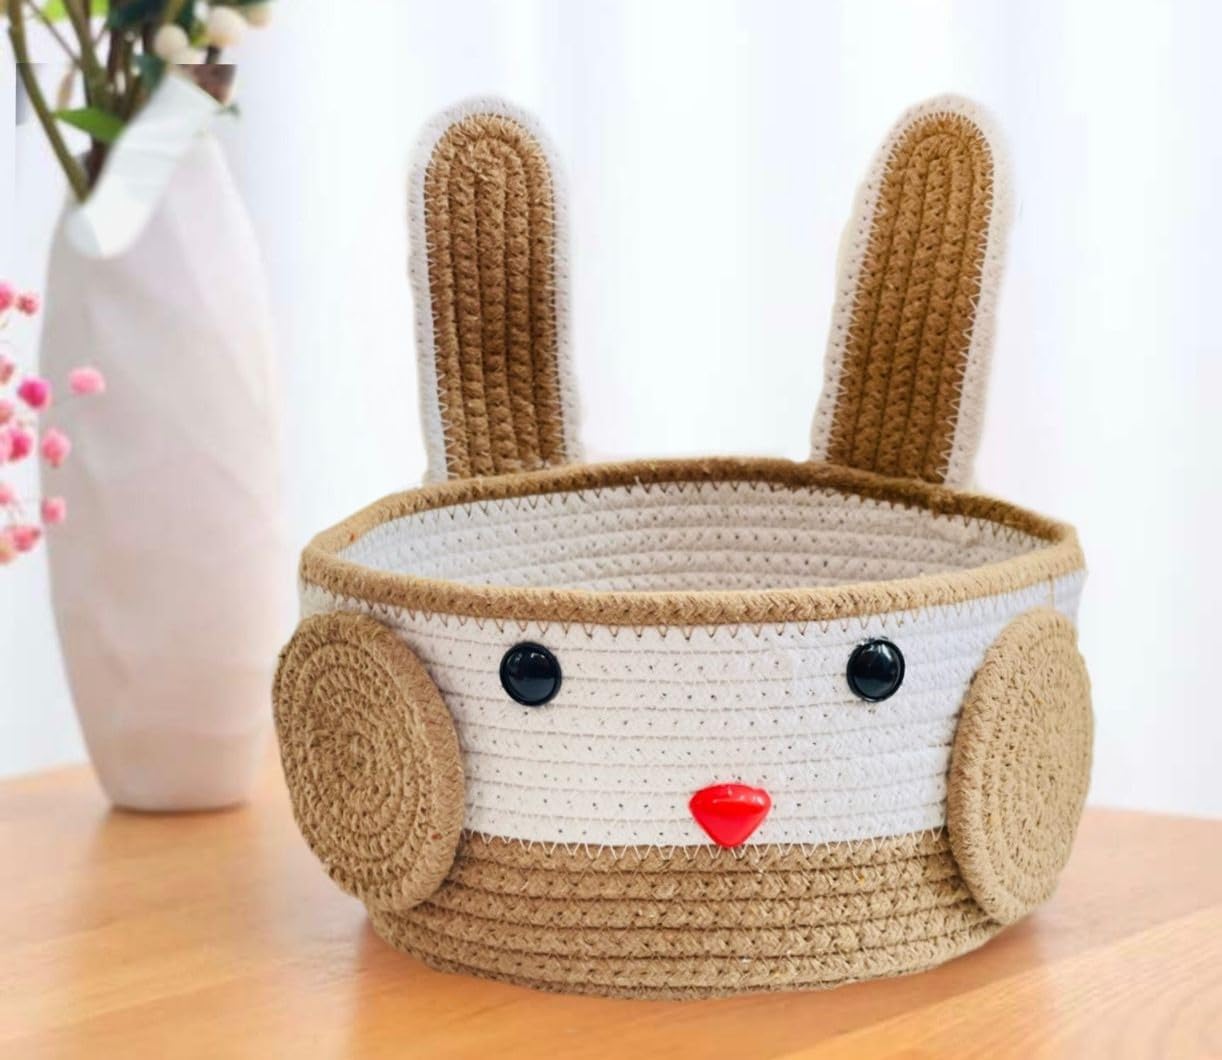 Kashyapa Rugs Collection - Cute Katty Woven Cotton Rope Storage Basket, Laundry Basket Organizer for Toys, Blanket, Clothes, Towels, Gifts | Pet Gift Basket for Cat, Dog - Beige